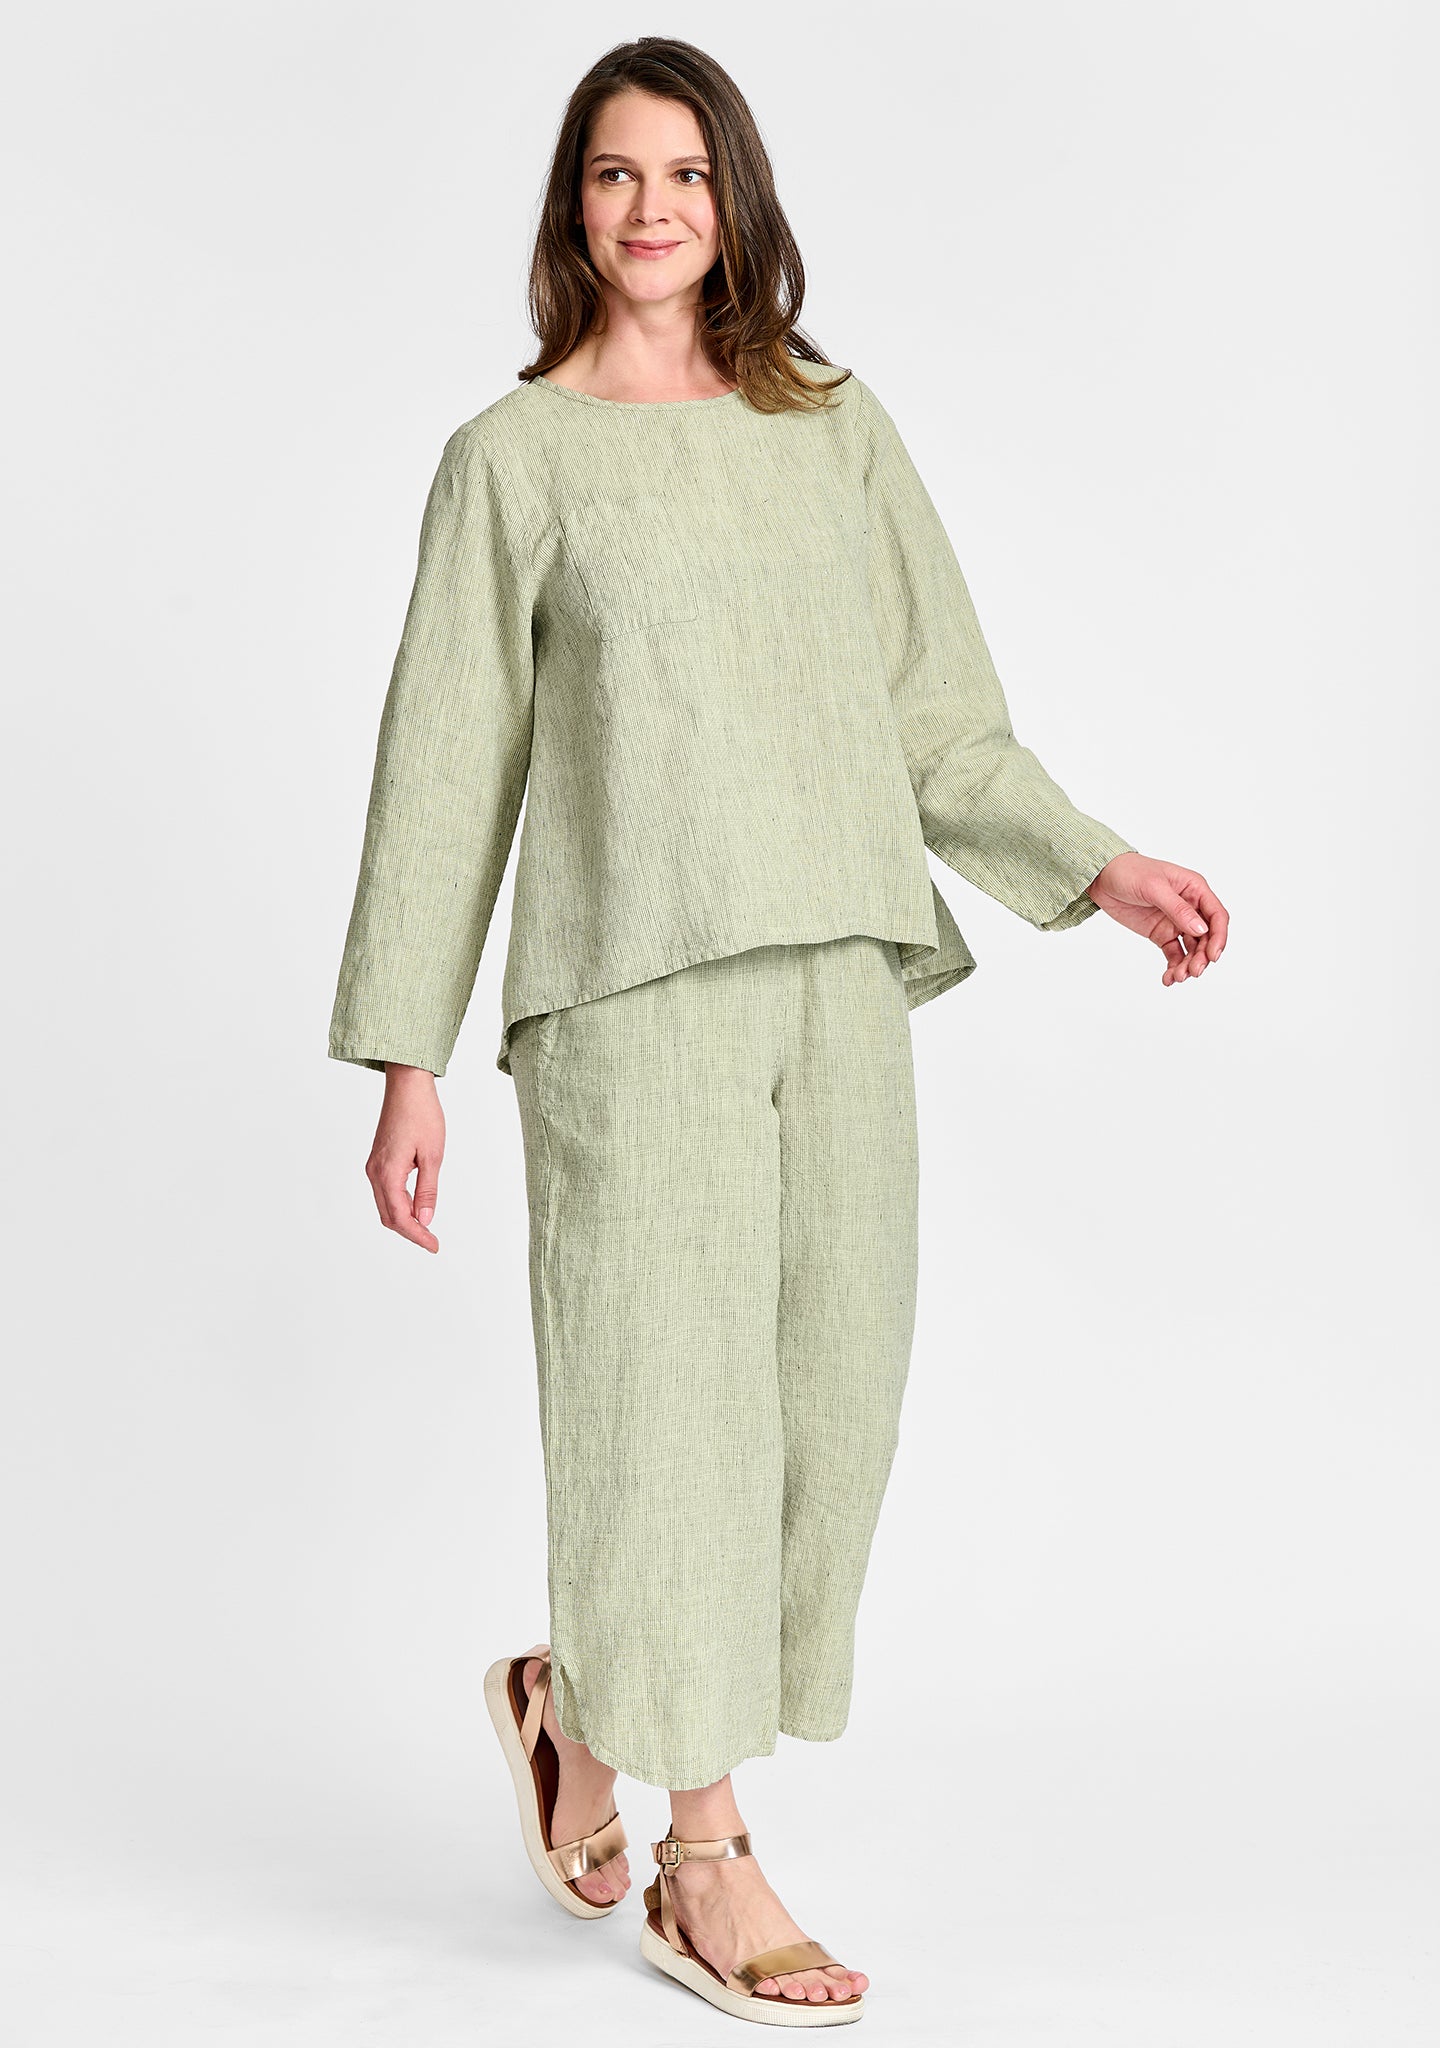 FLAX linen pullover in green with linen pants in green